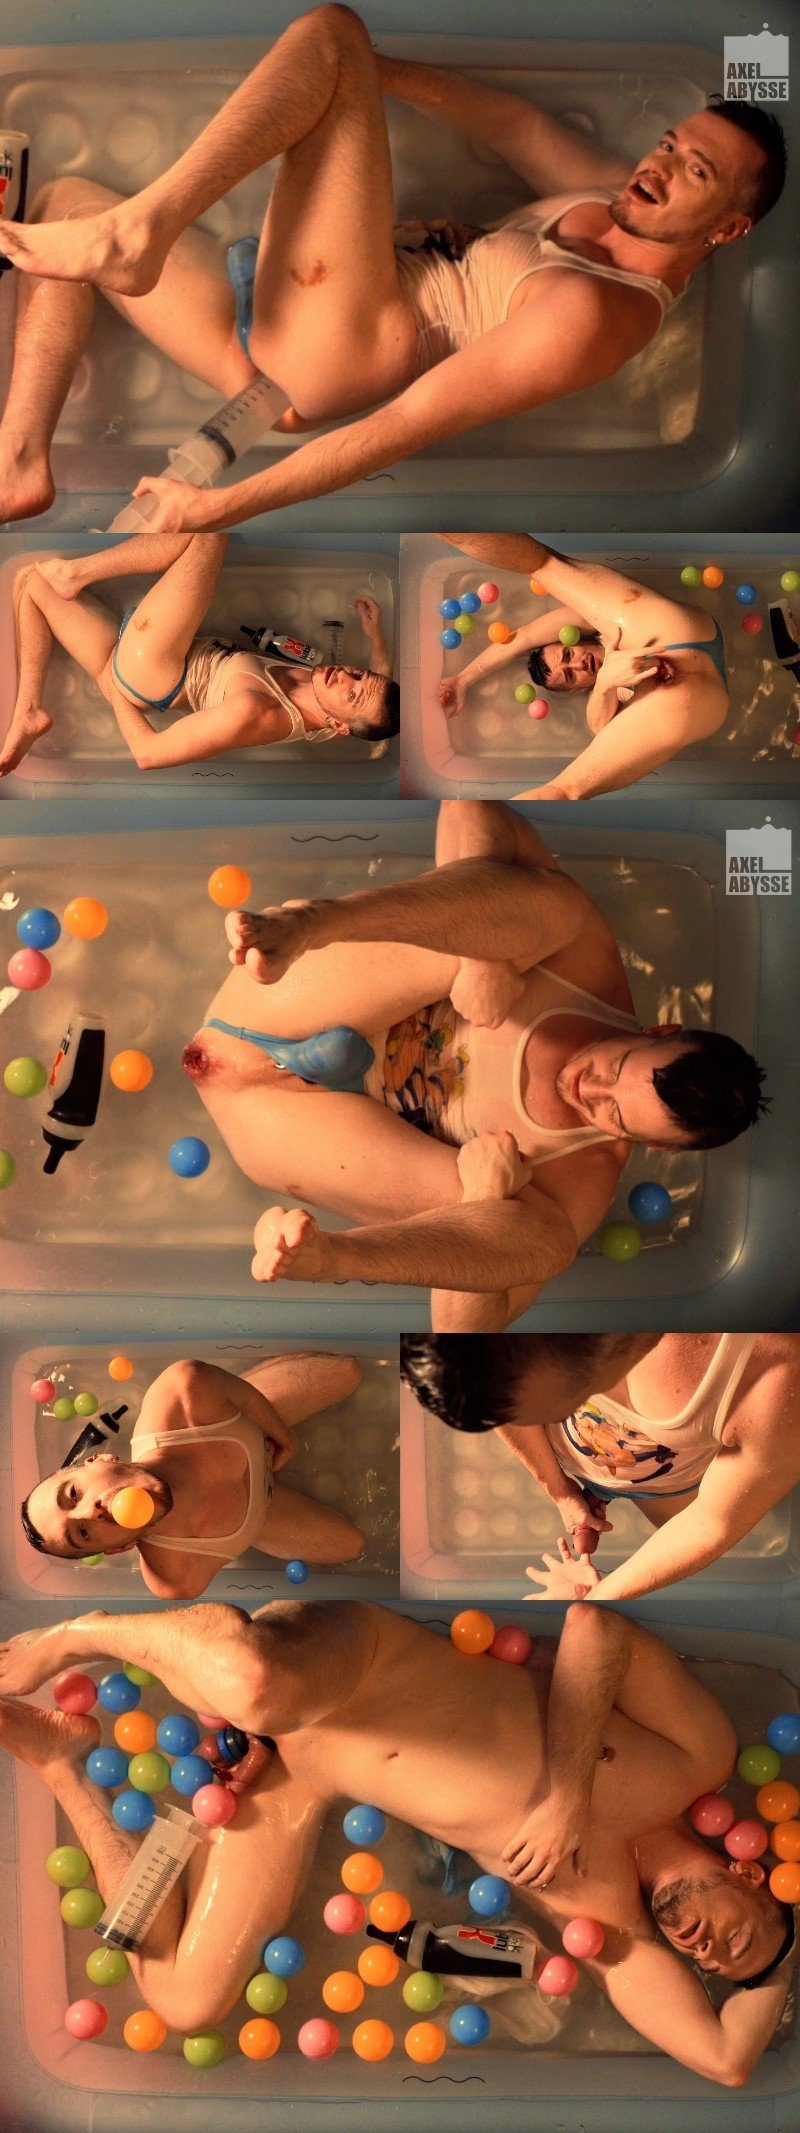 The Reason You Don't Want to Play in the IKEA Ball Pit